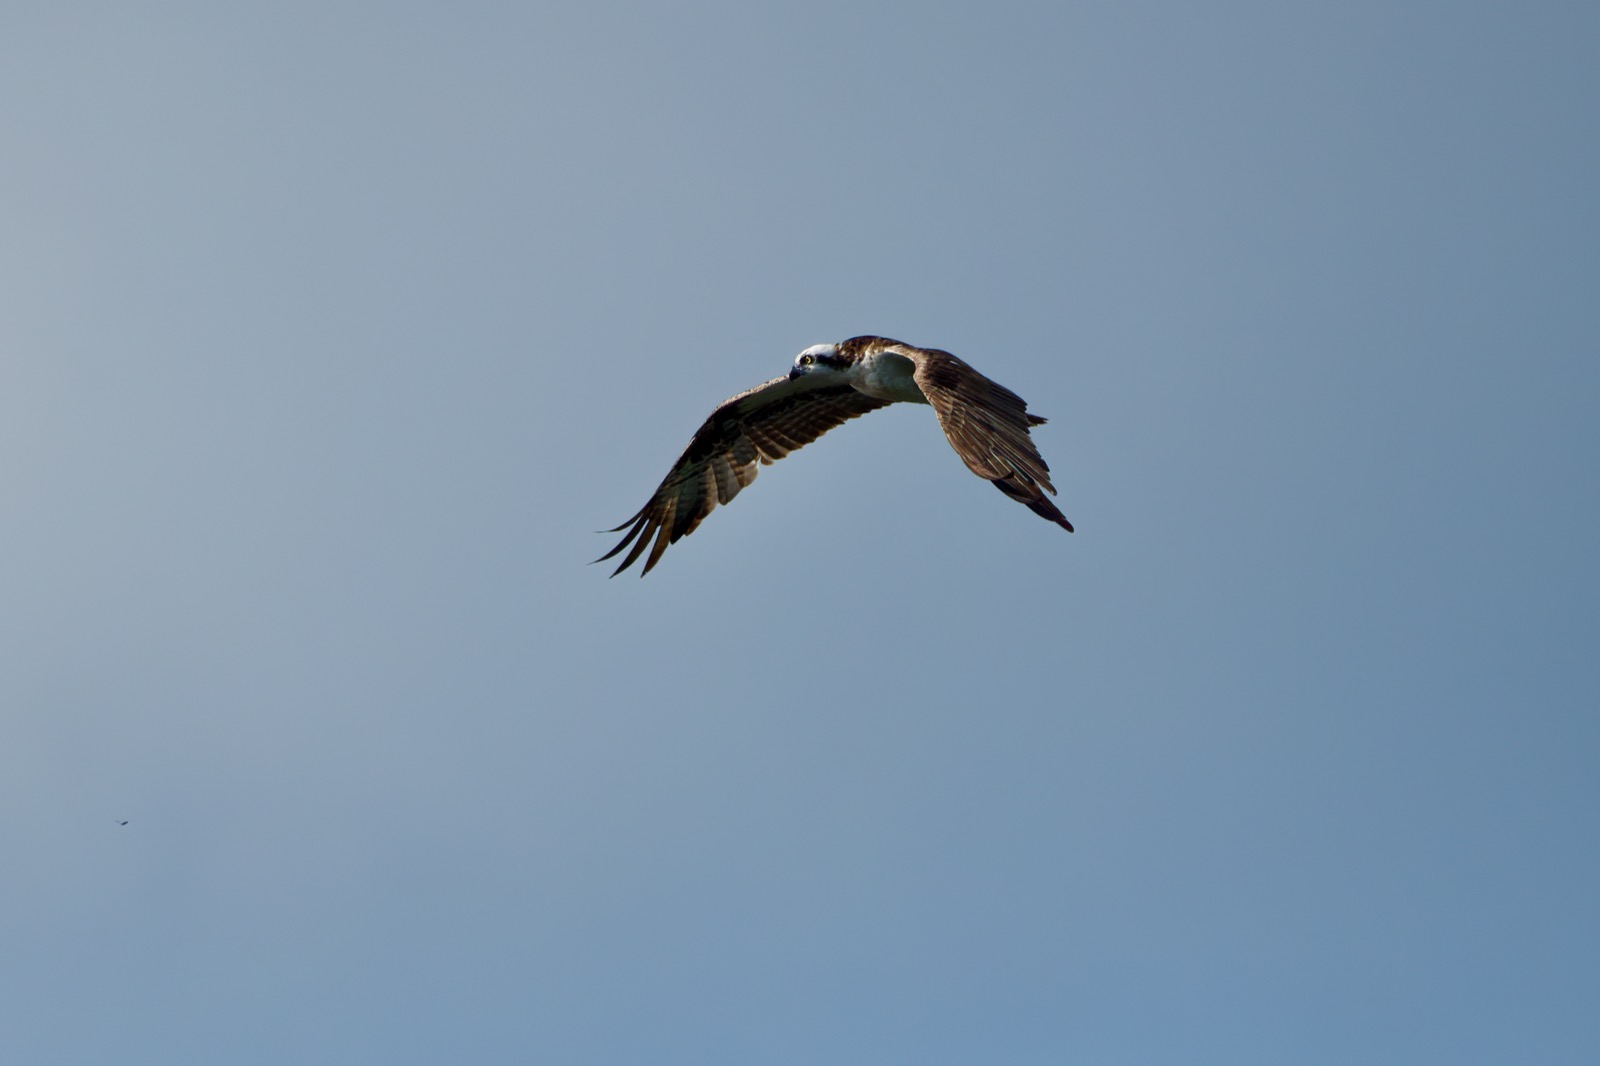 Osprey in flight against a blue sky, bird looking to the right of its flight path with sunlight illuminating the left eye.